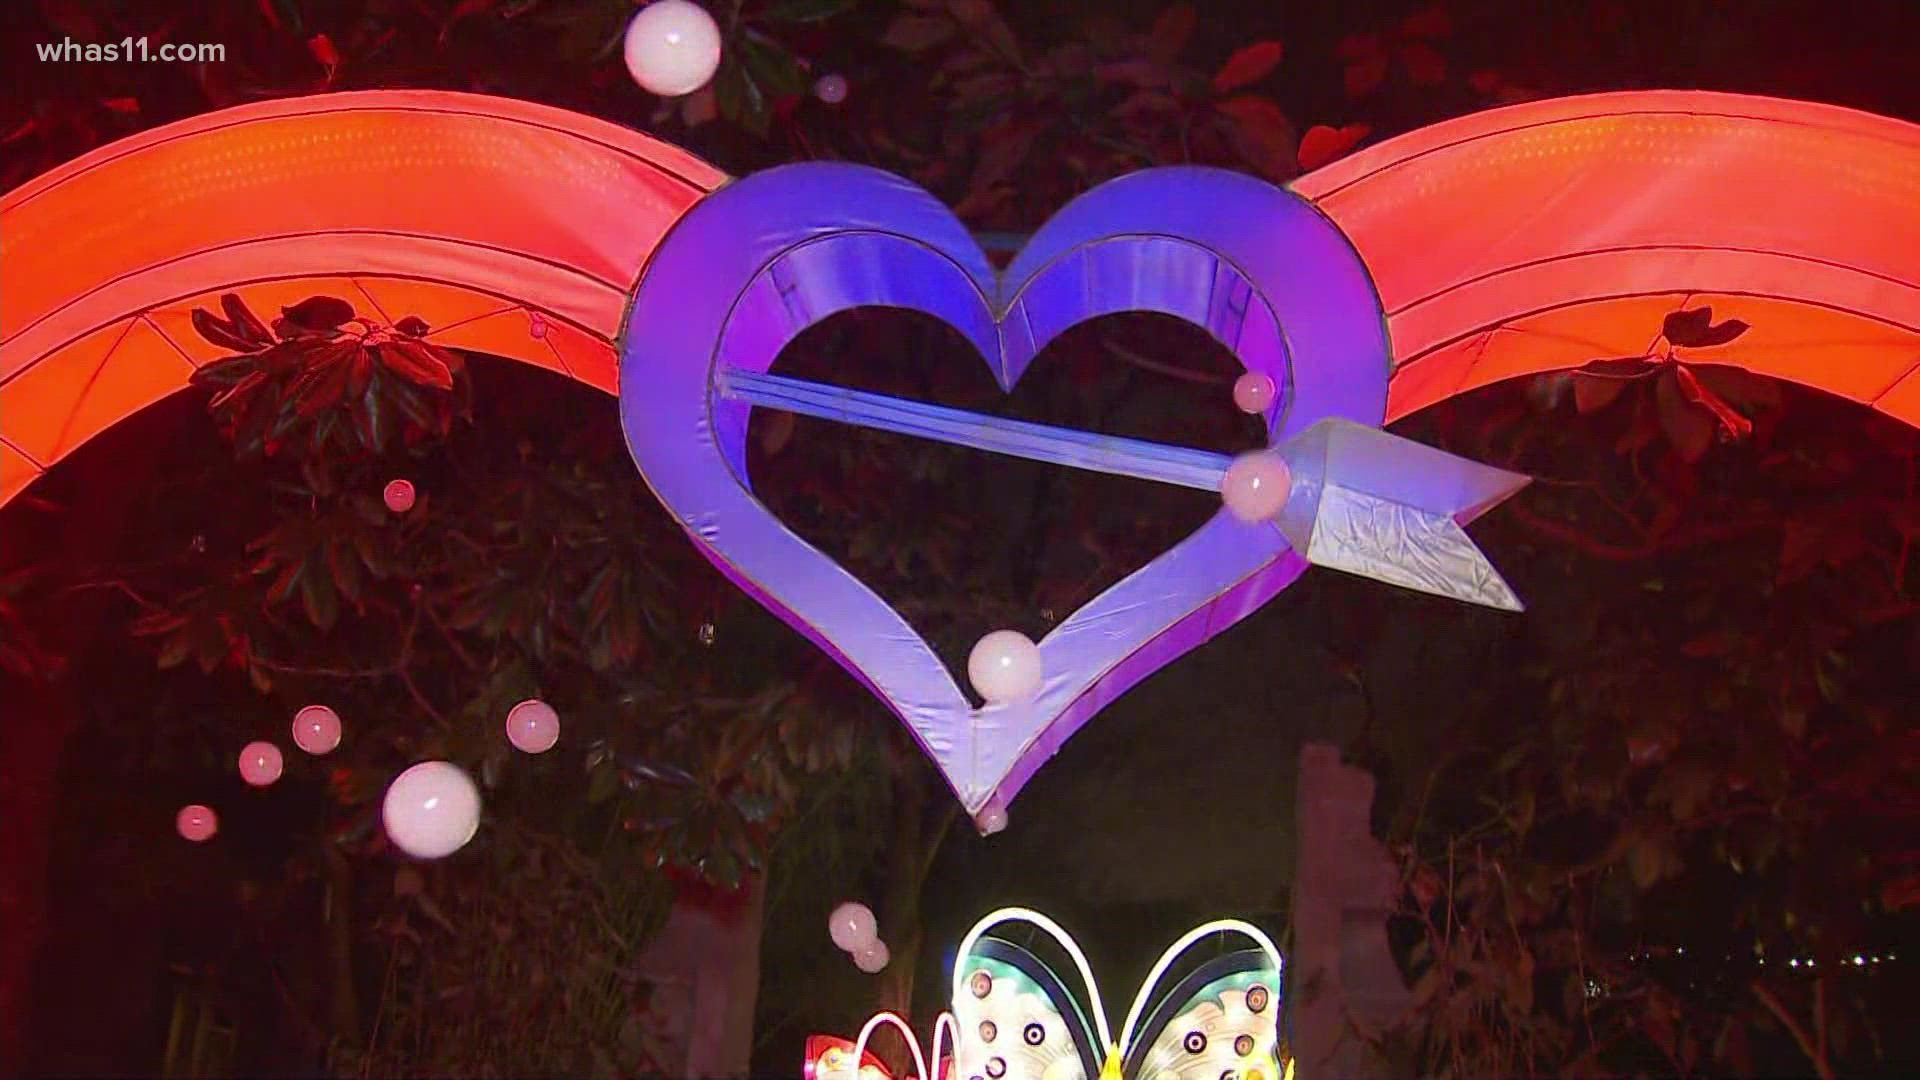 The Wild Lights festival has several interactive displays for you and your family to enjoy. You can even get a workout in with this changing-color heart display!